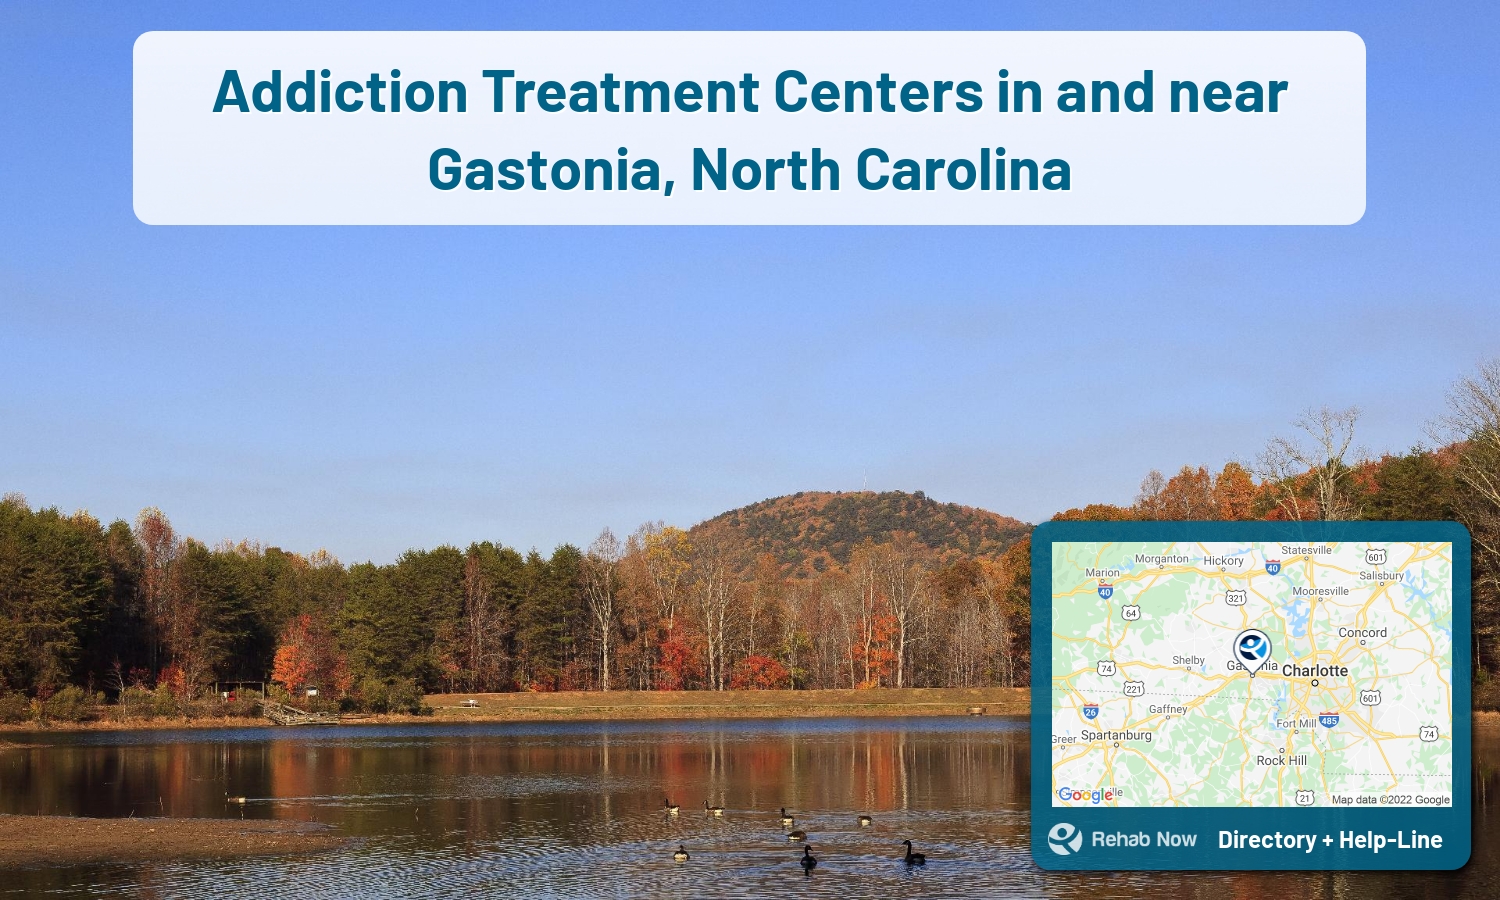 Gastonia, NC Treatment Centers. Find drug rehab in Gastonia, North Carolina, or detox and treatment programs. Get the right help now!